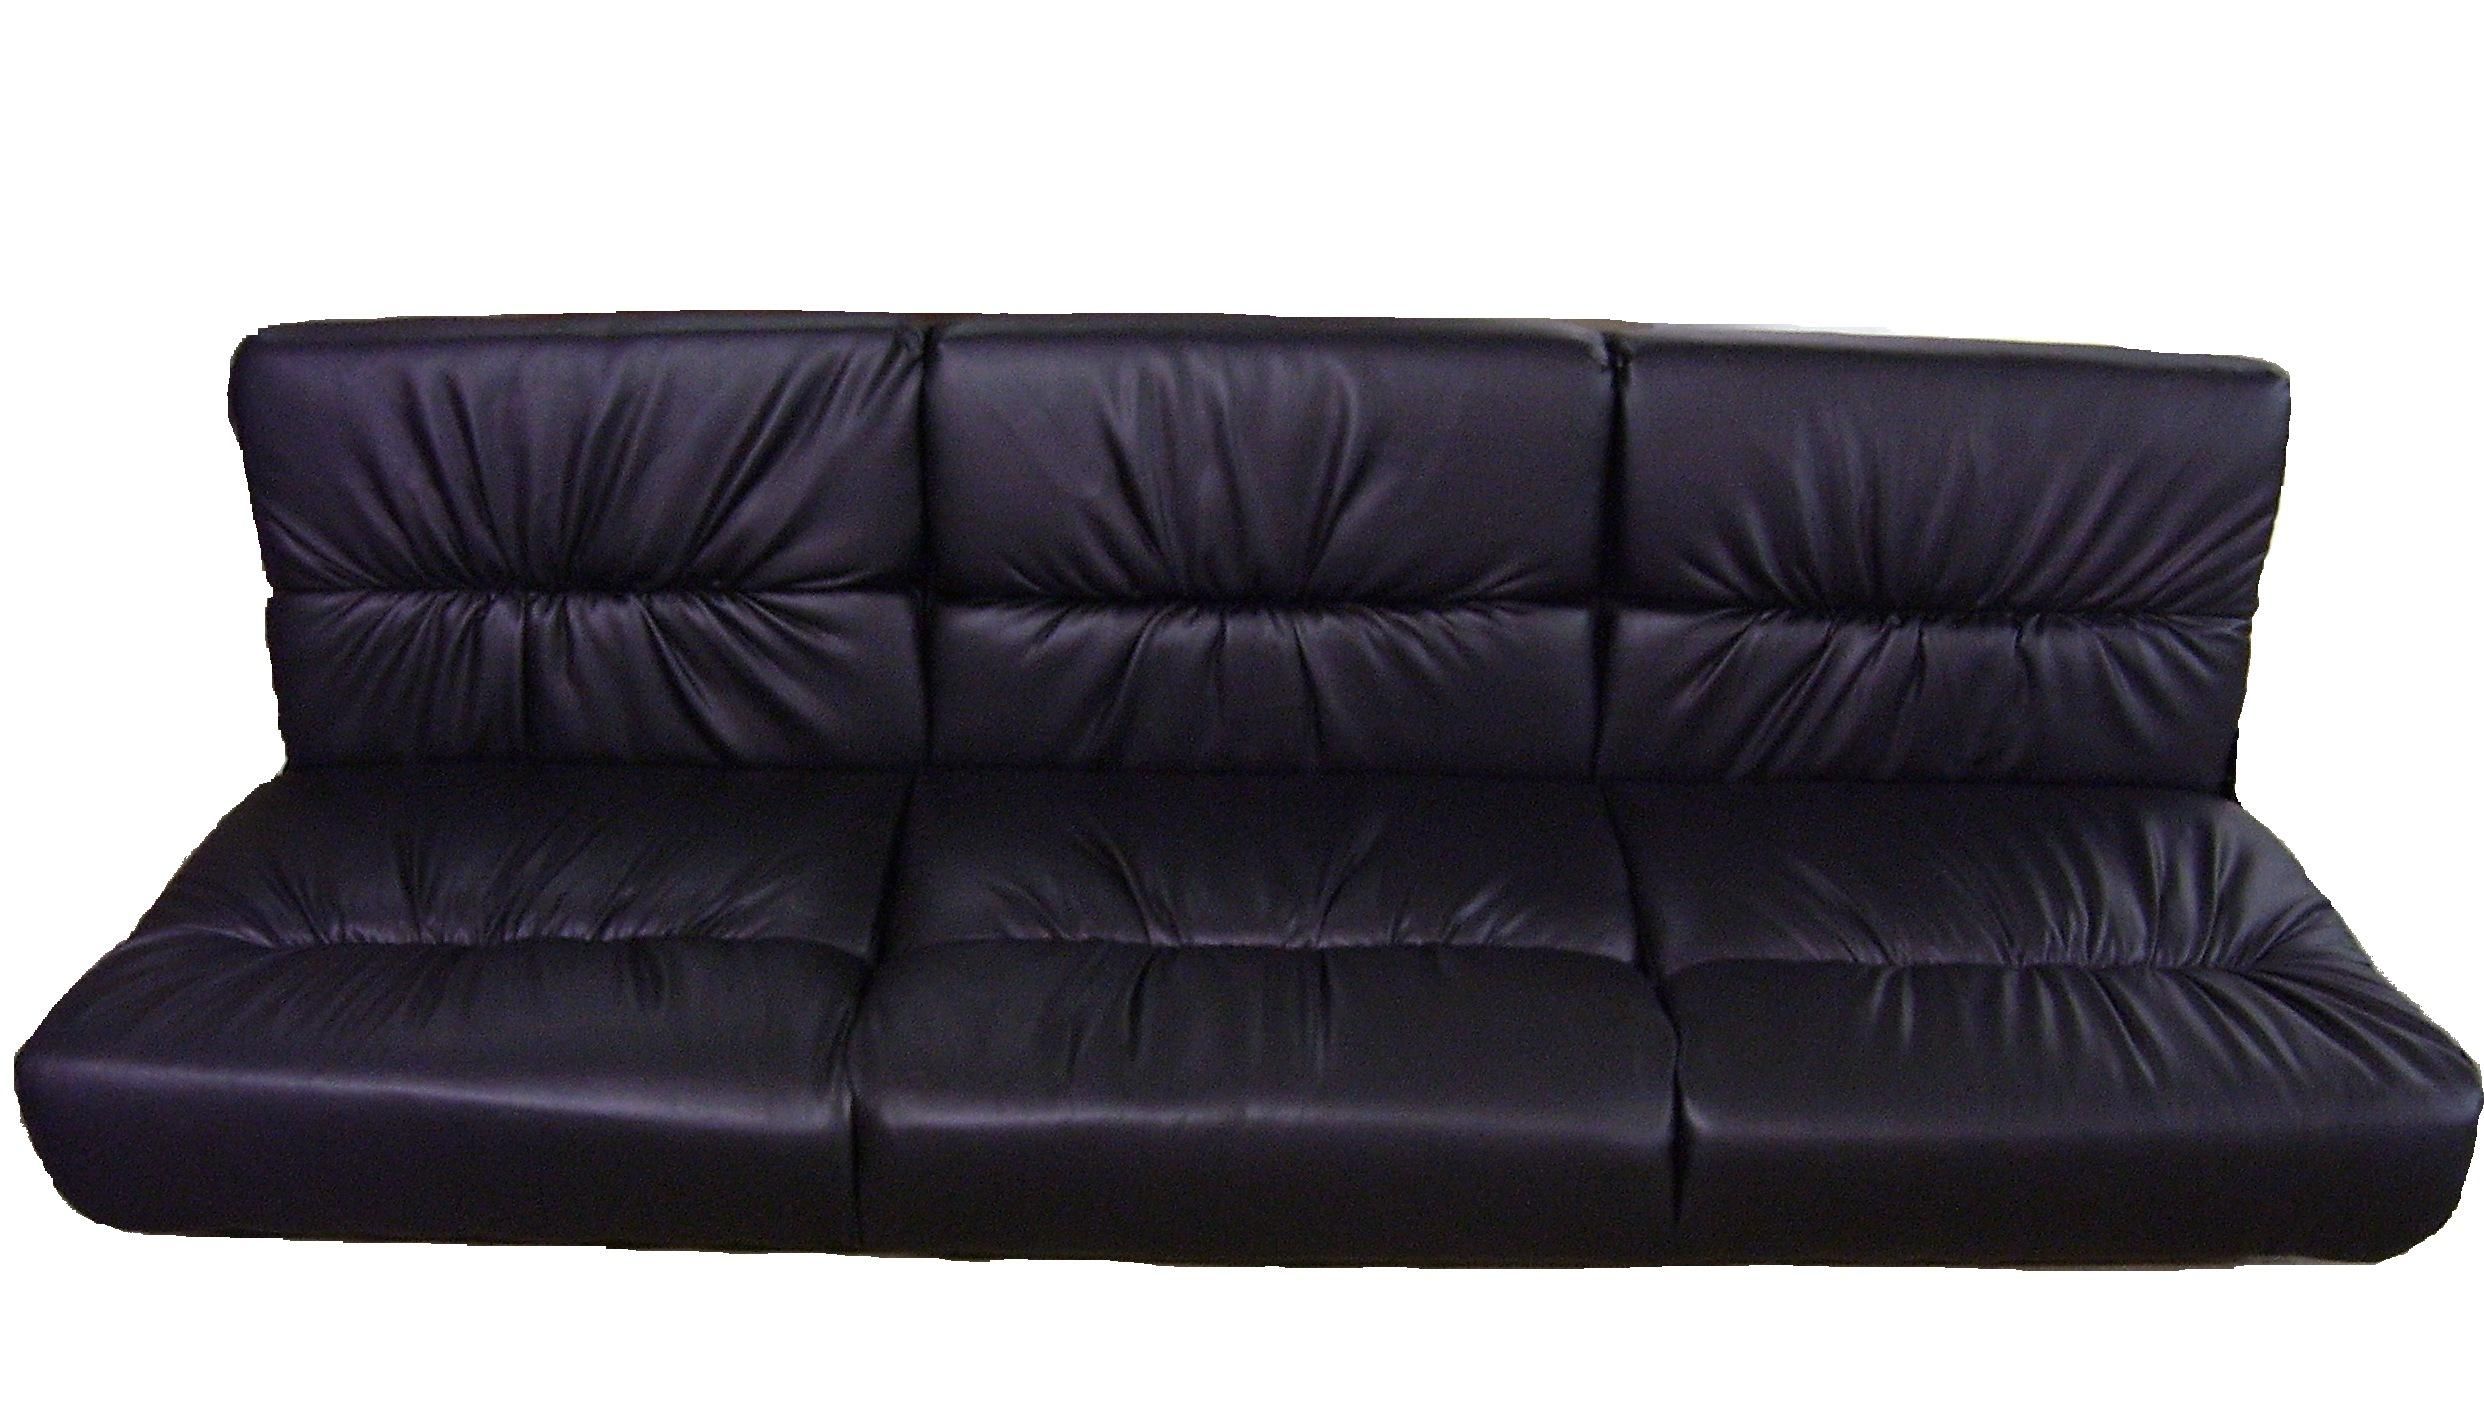 20 Best Ideas Rv Jackknife Sofas | Sofa Ideas Regarding Sectional Sofas For Campers (View 10 of 10)